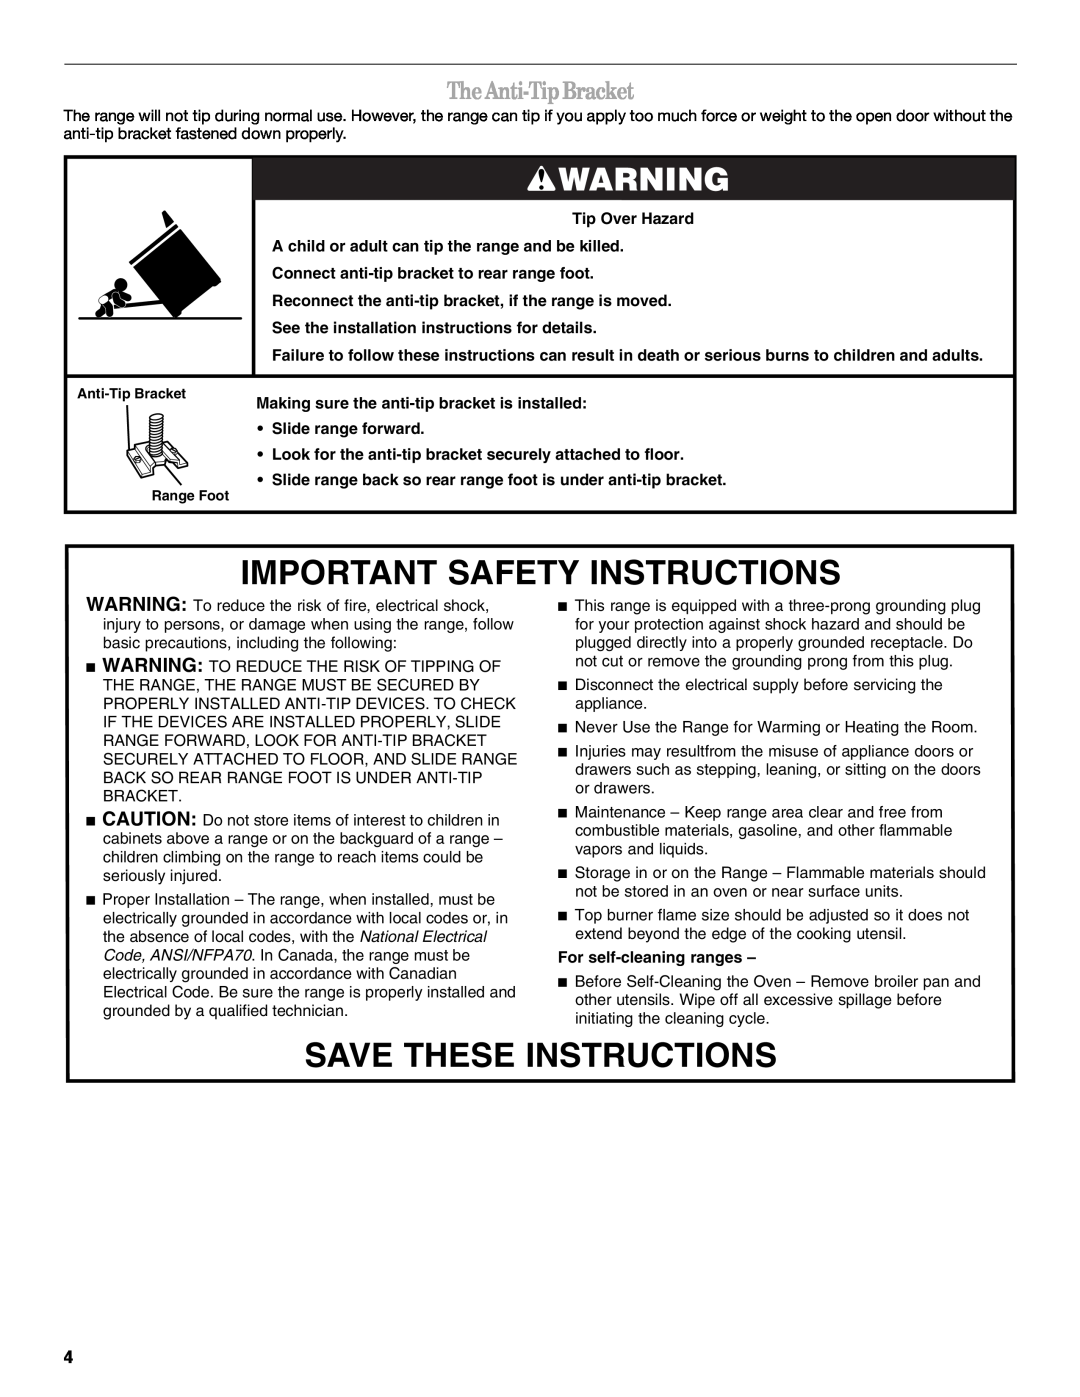 Whirlpool SF315PEPB1 Important Safety Instructions, Save These Instructions, TheAnti-TipBracket, For self-cleaning ranges 